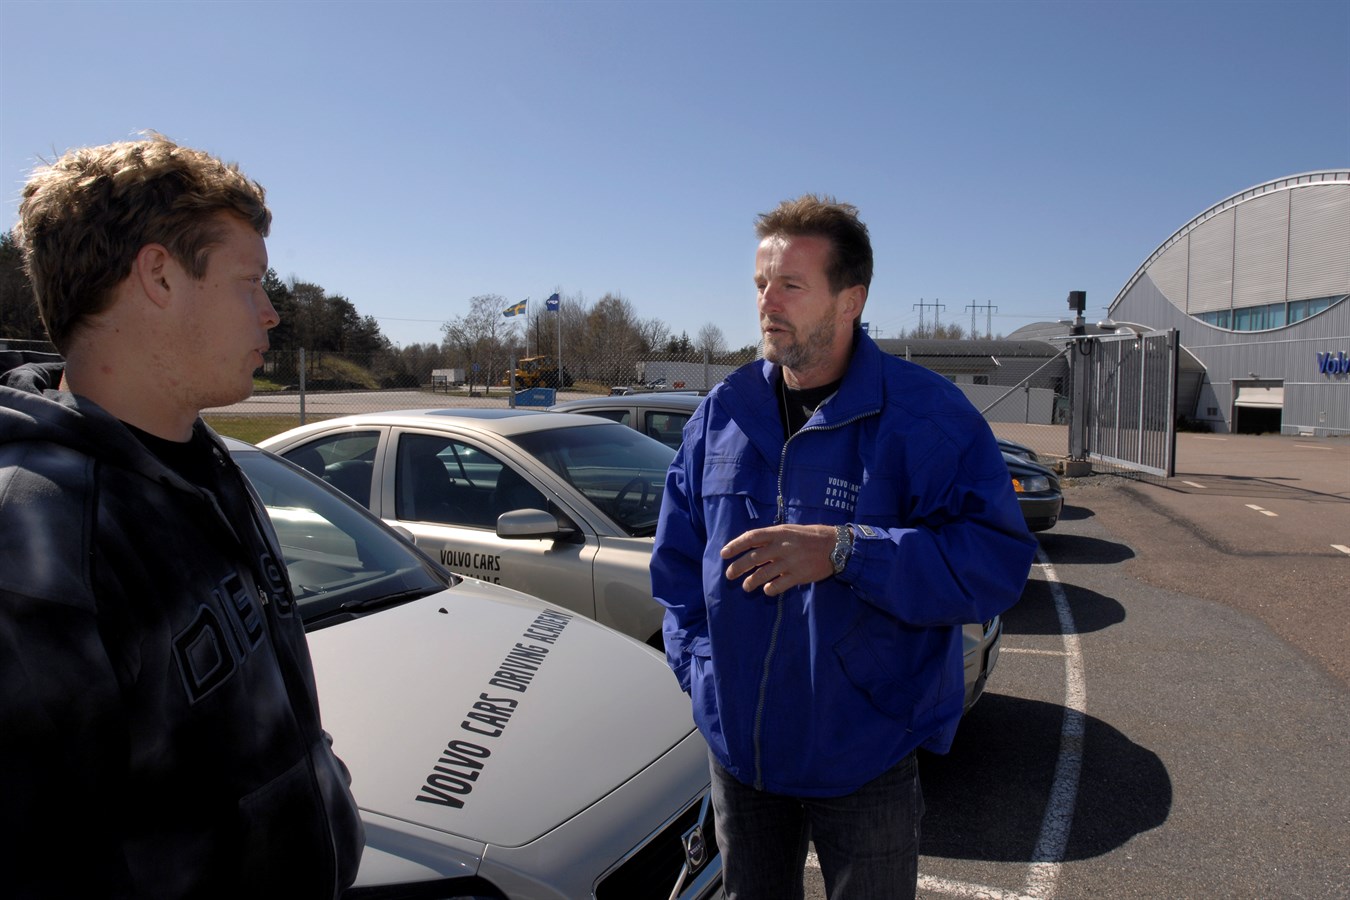 Volvo Cars Driving Academy, teaches eco-driving